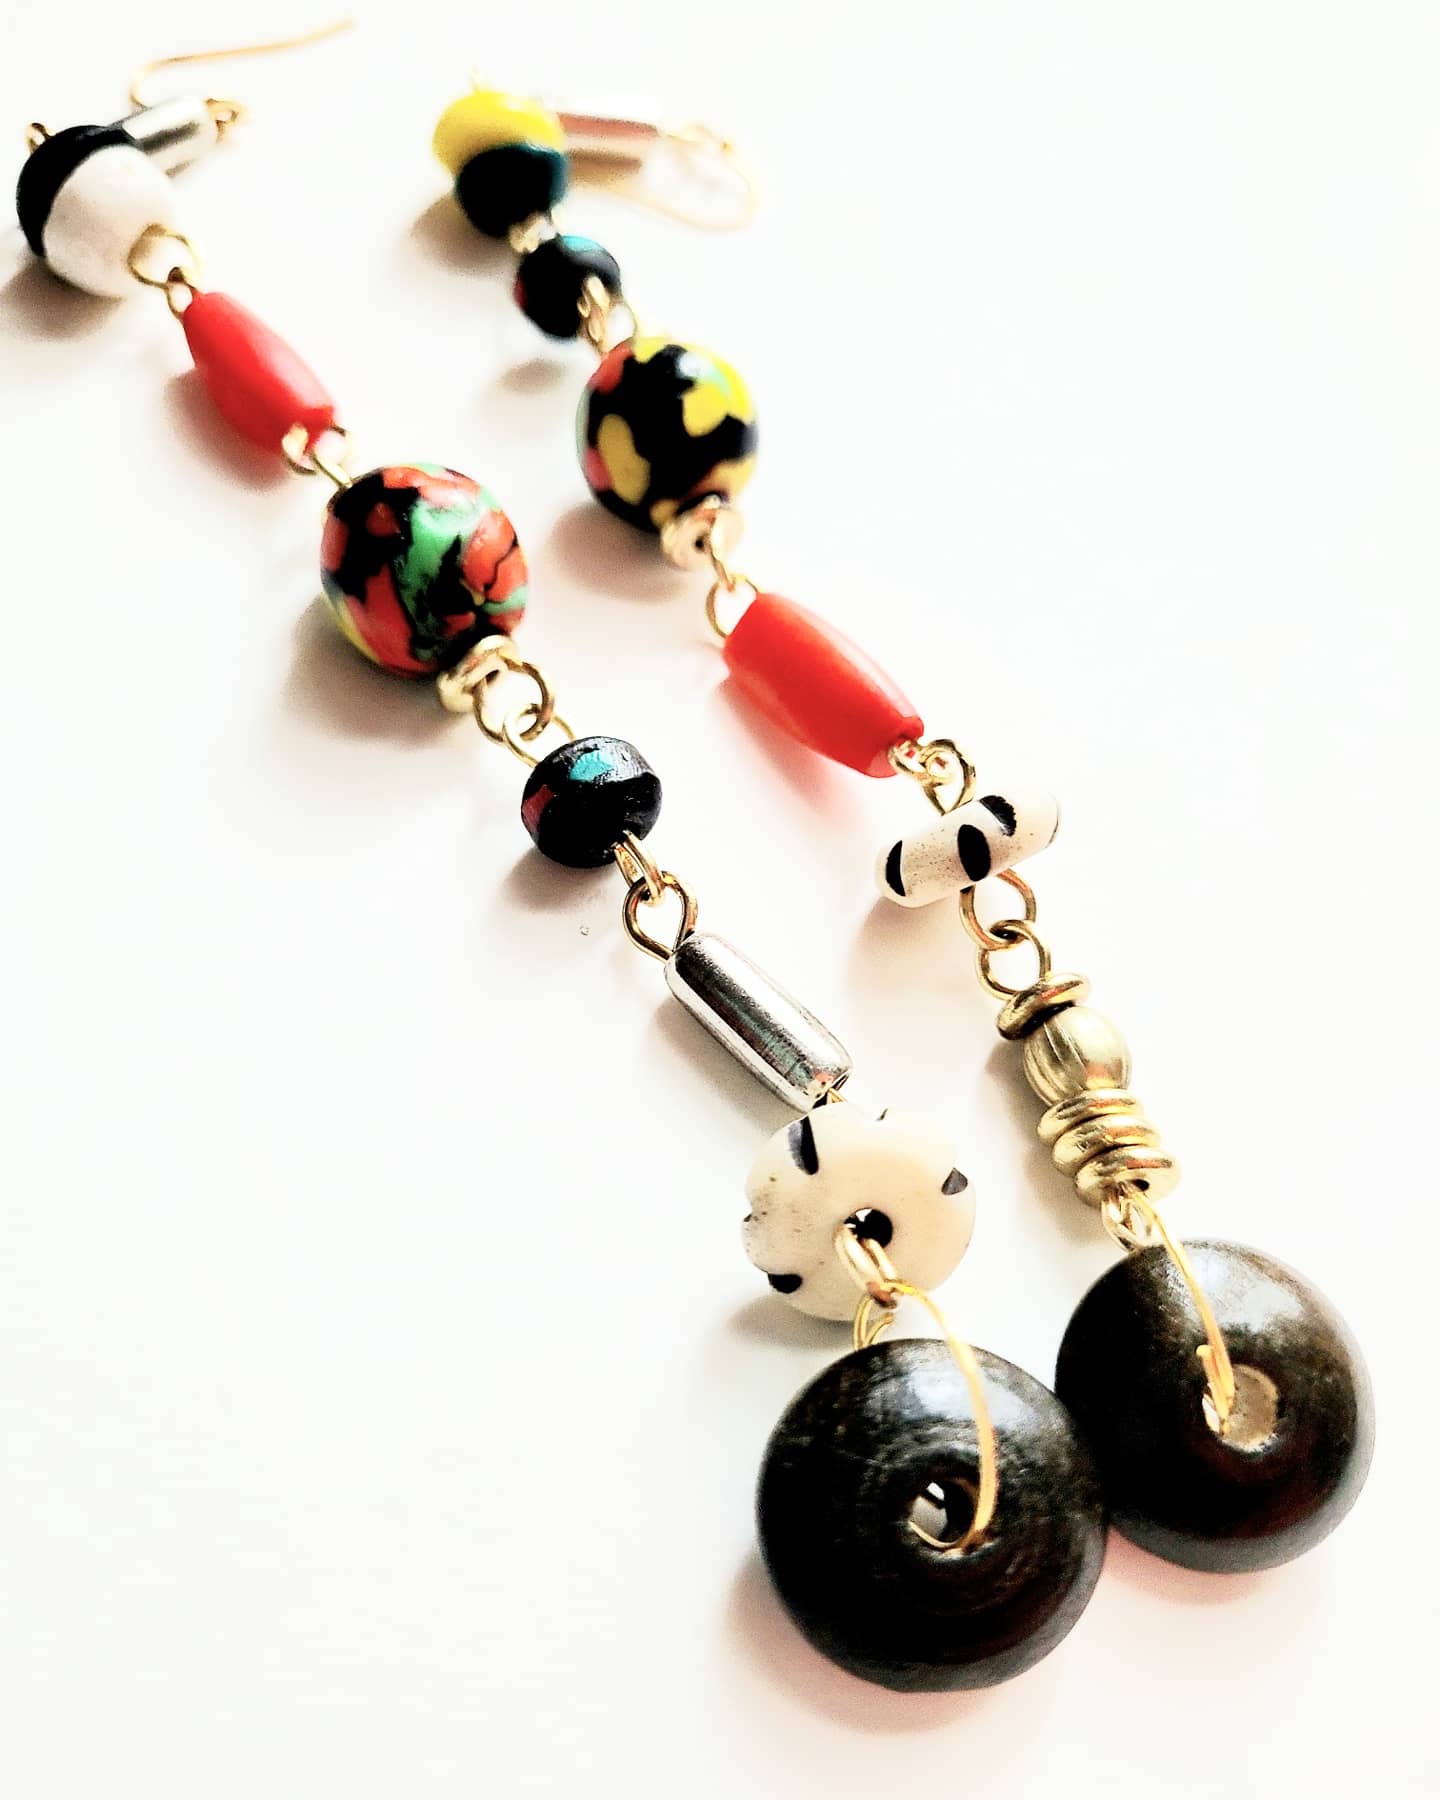 'Shero', a 5.5 inch mixed media compilation of wood, bone, Ghanaian recycled glass beads and brass!